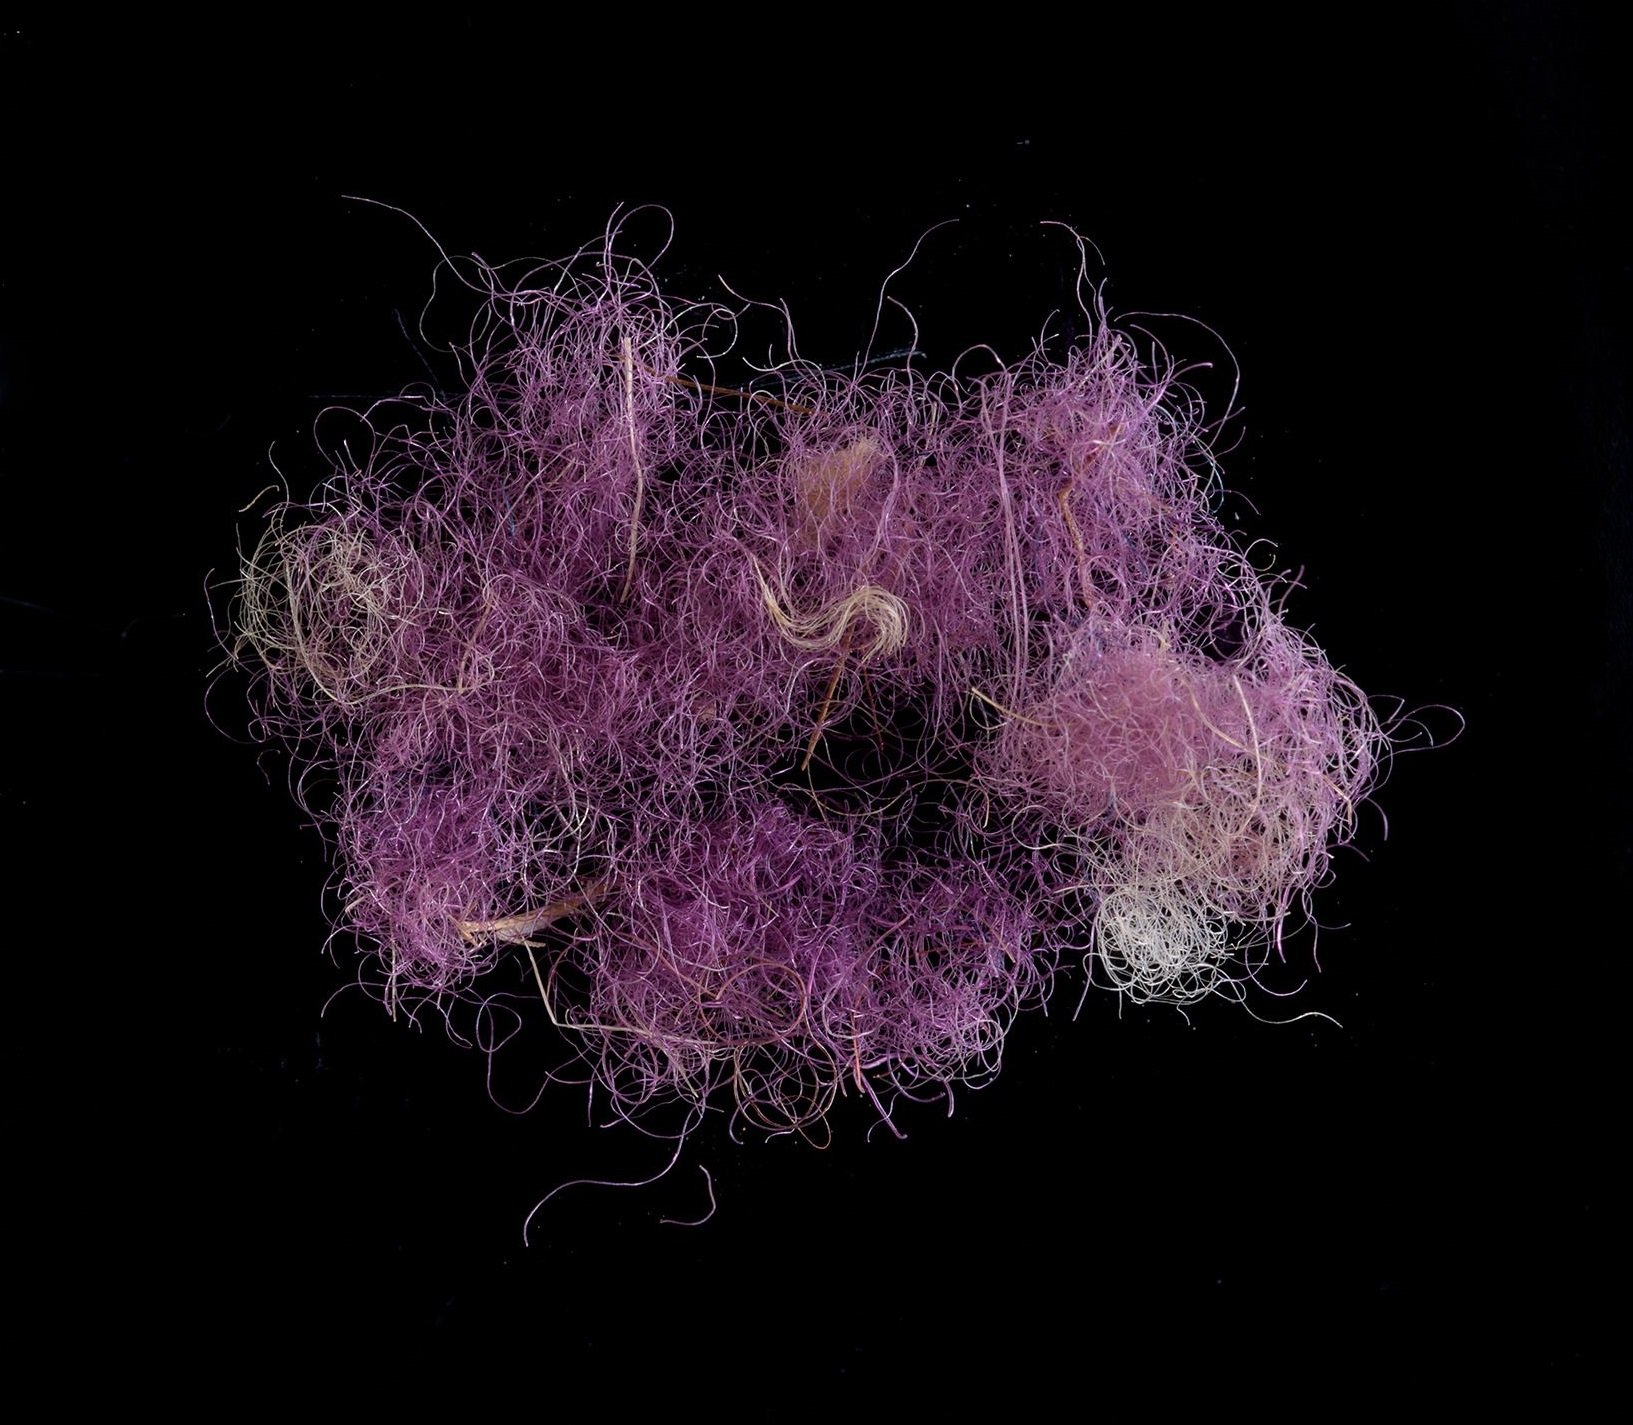 Rare Purple Dye Discovered in Ancient Fabric